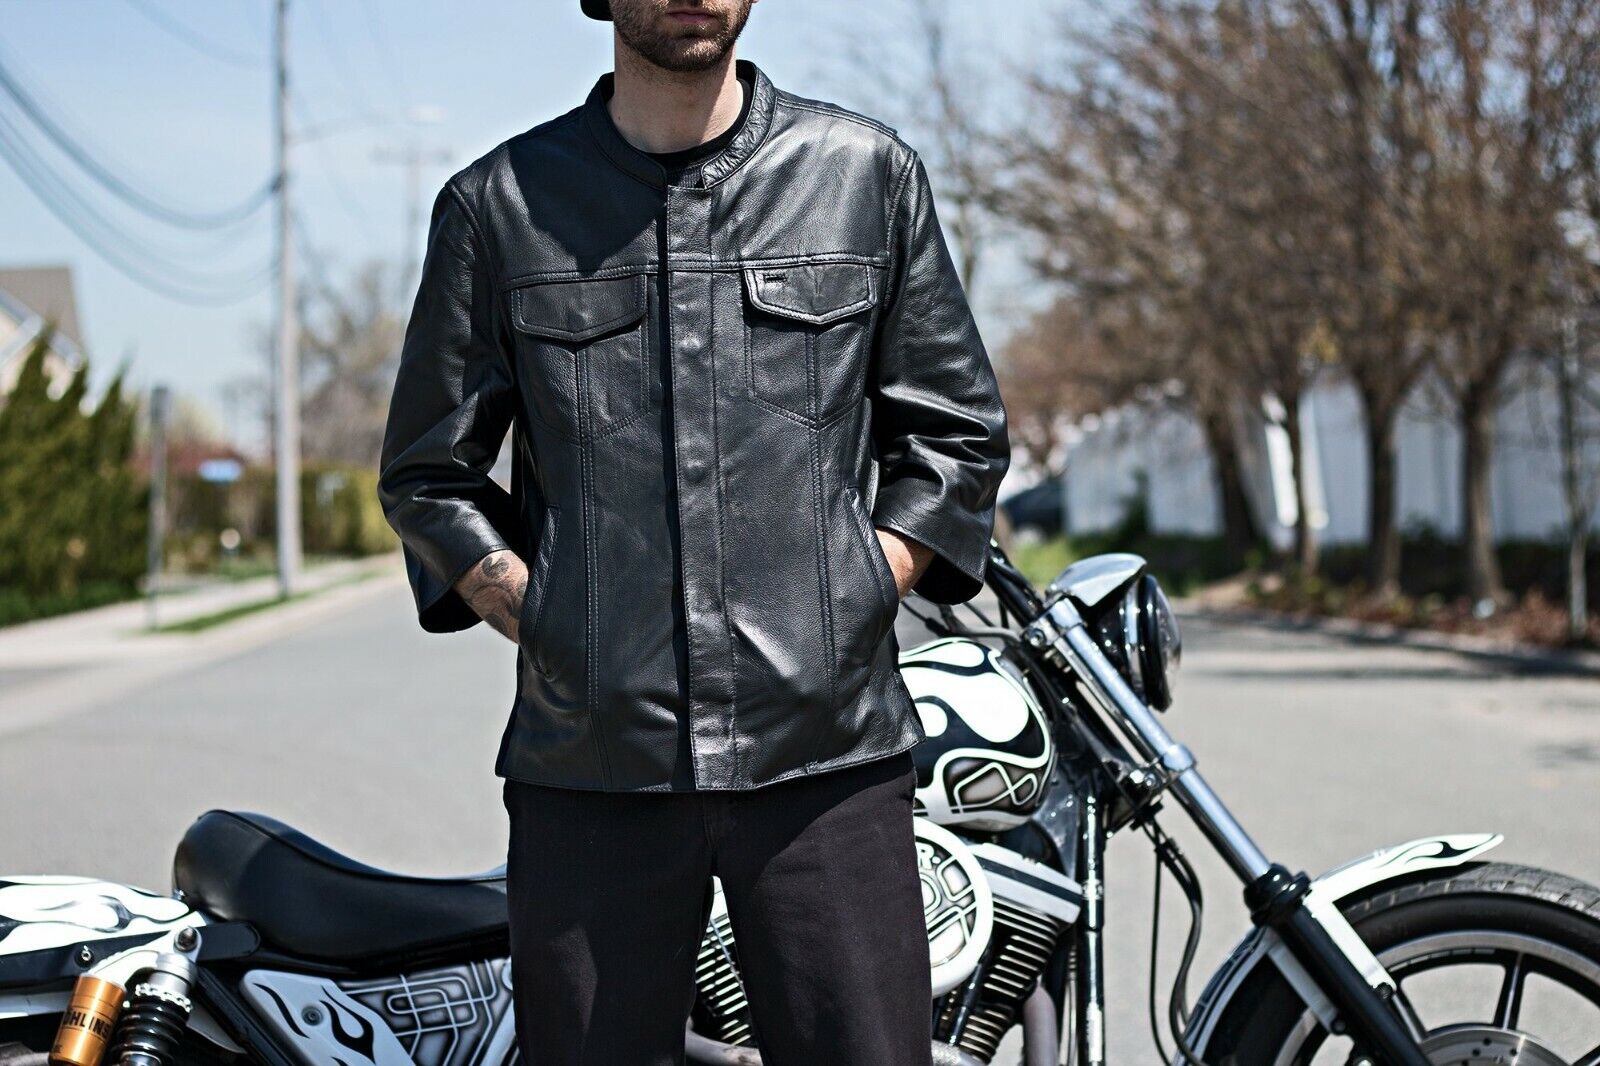 A motorcycle jacket that blends high-performance with sleek design